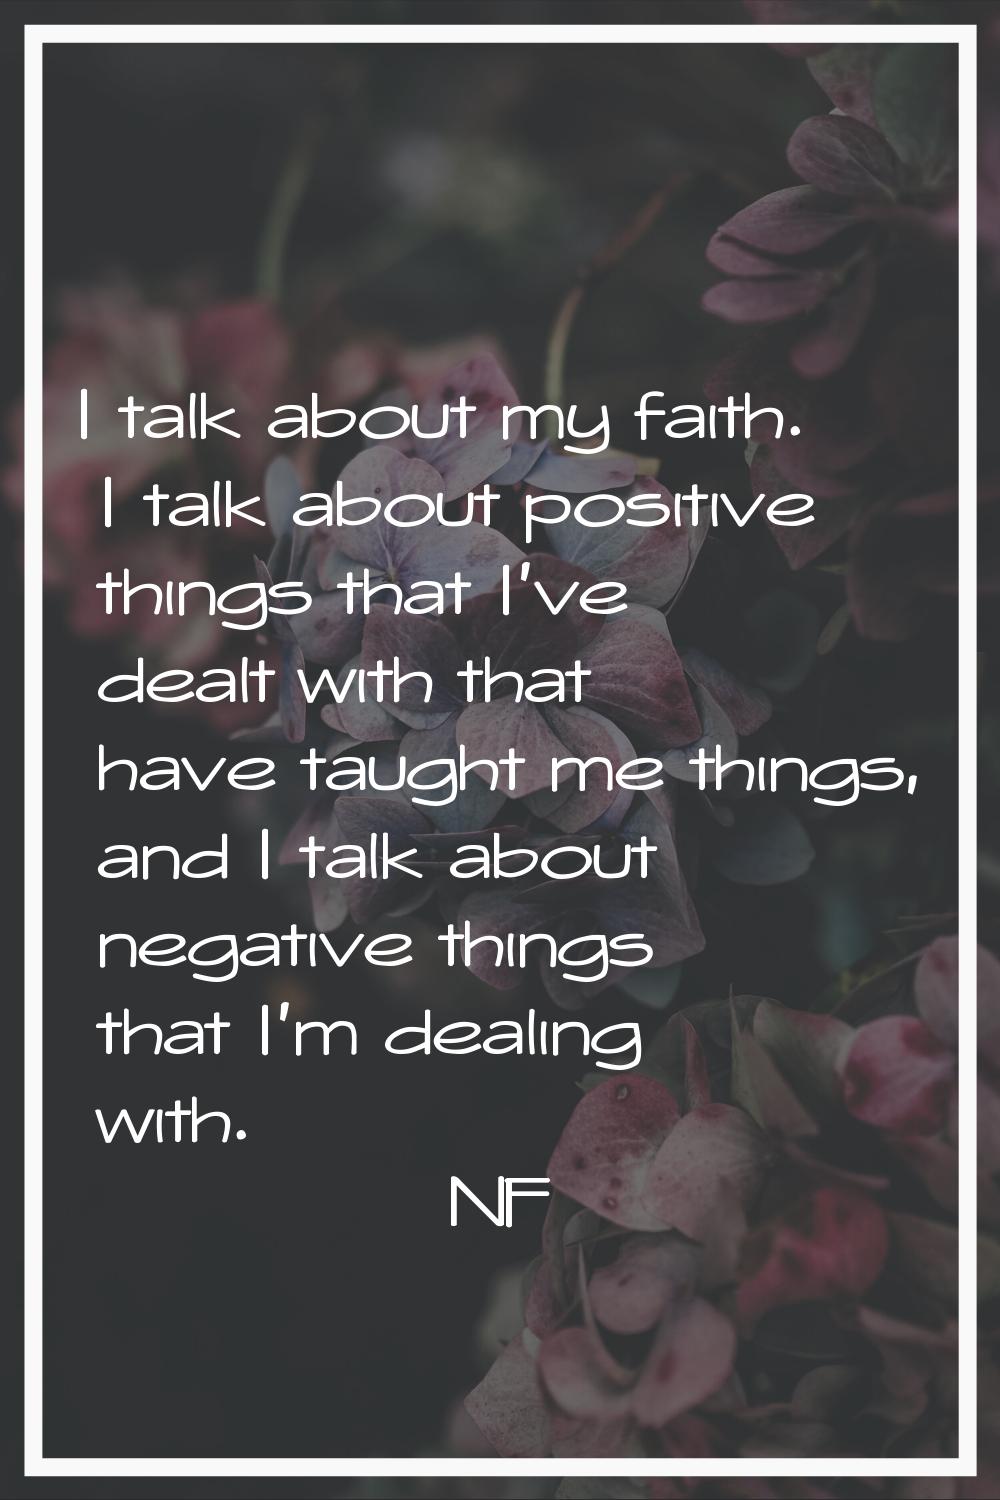 I talk about my faith. I talk about positive things that I've dealt with that have taught me things